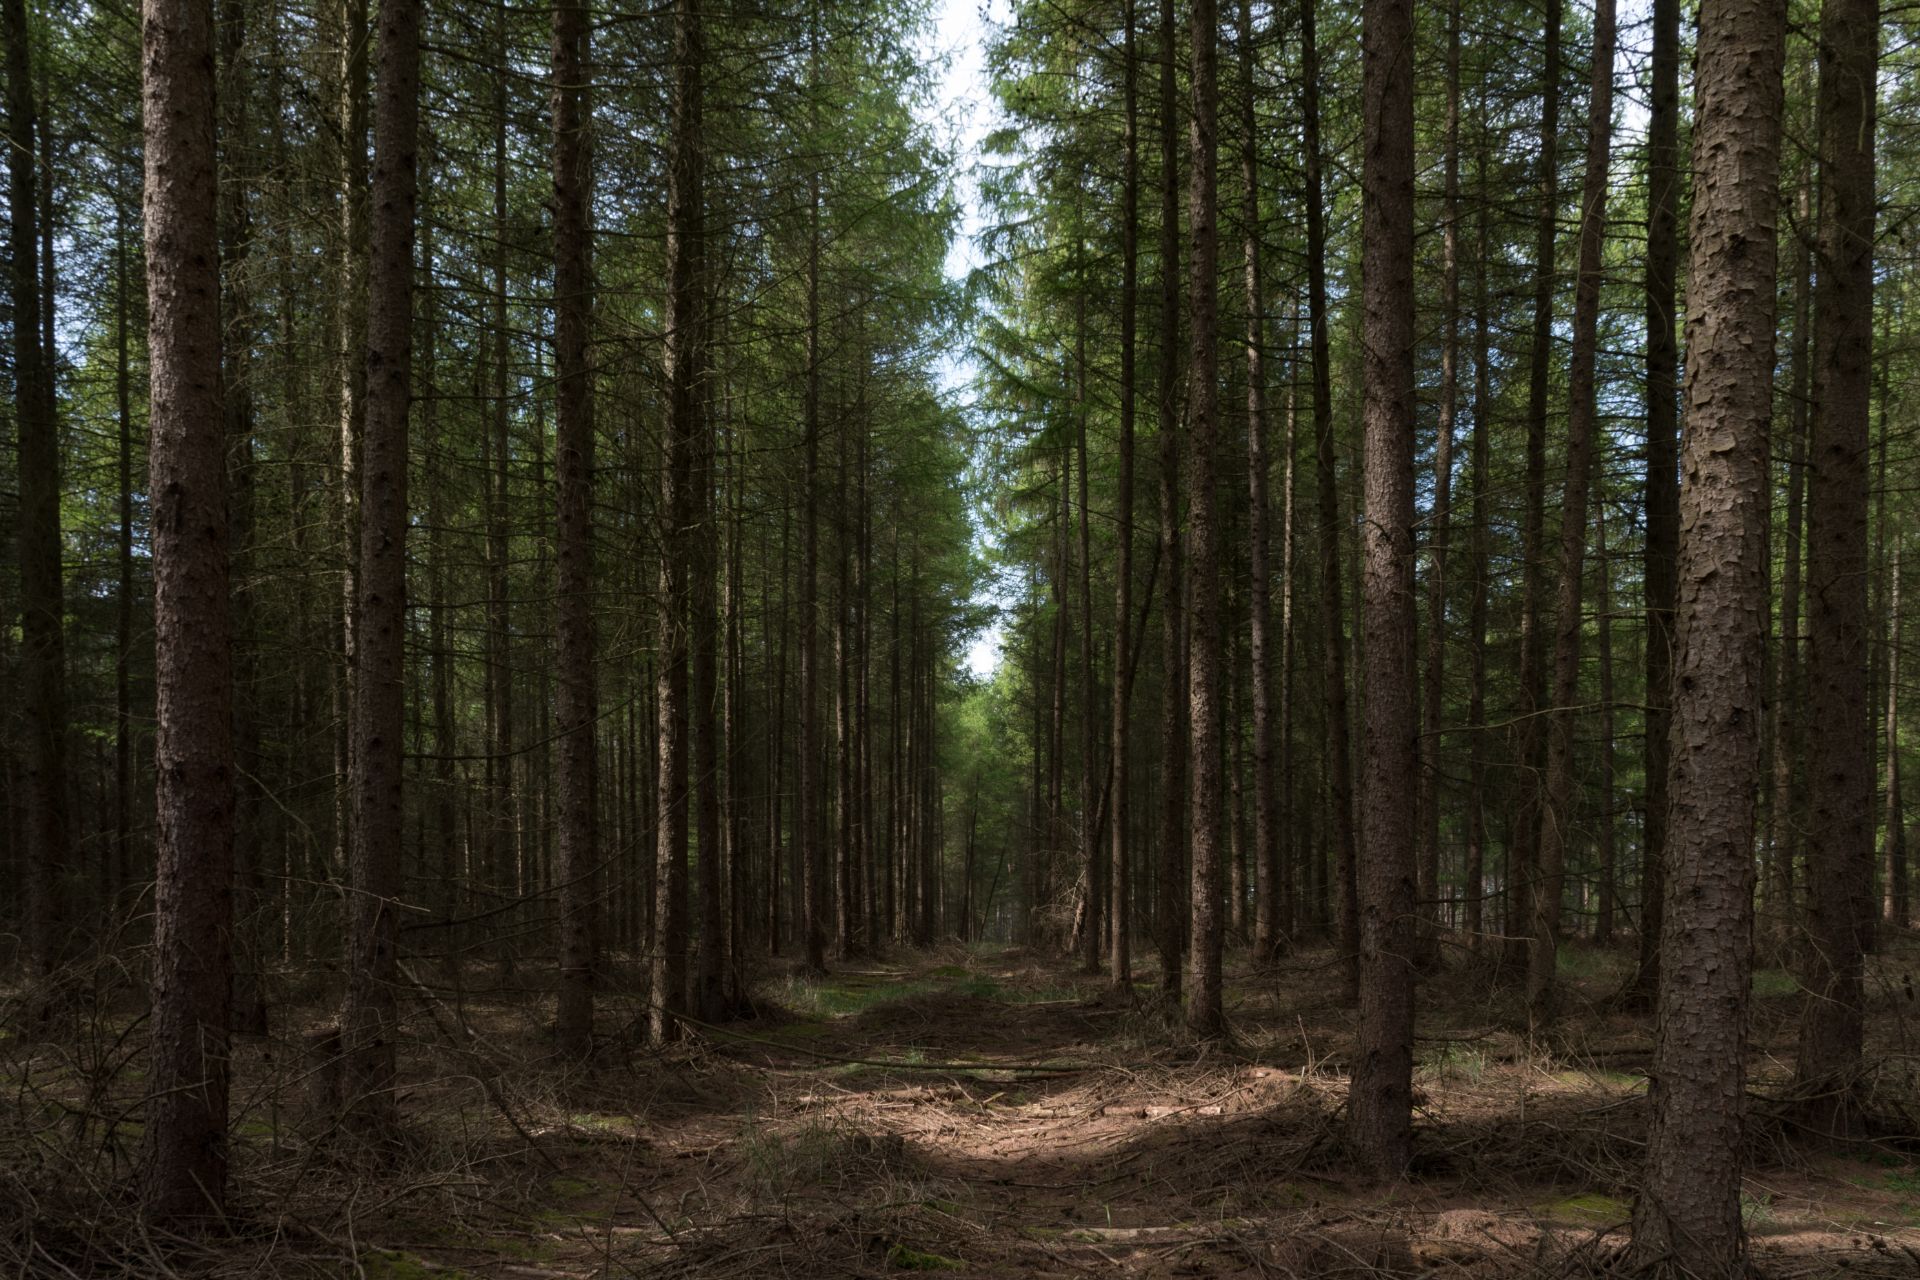 light-falling-on-forest-floor-amid-trees-in-high-lodge-thetford-forest-norfolk